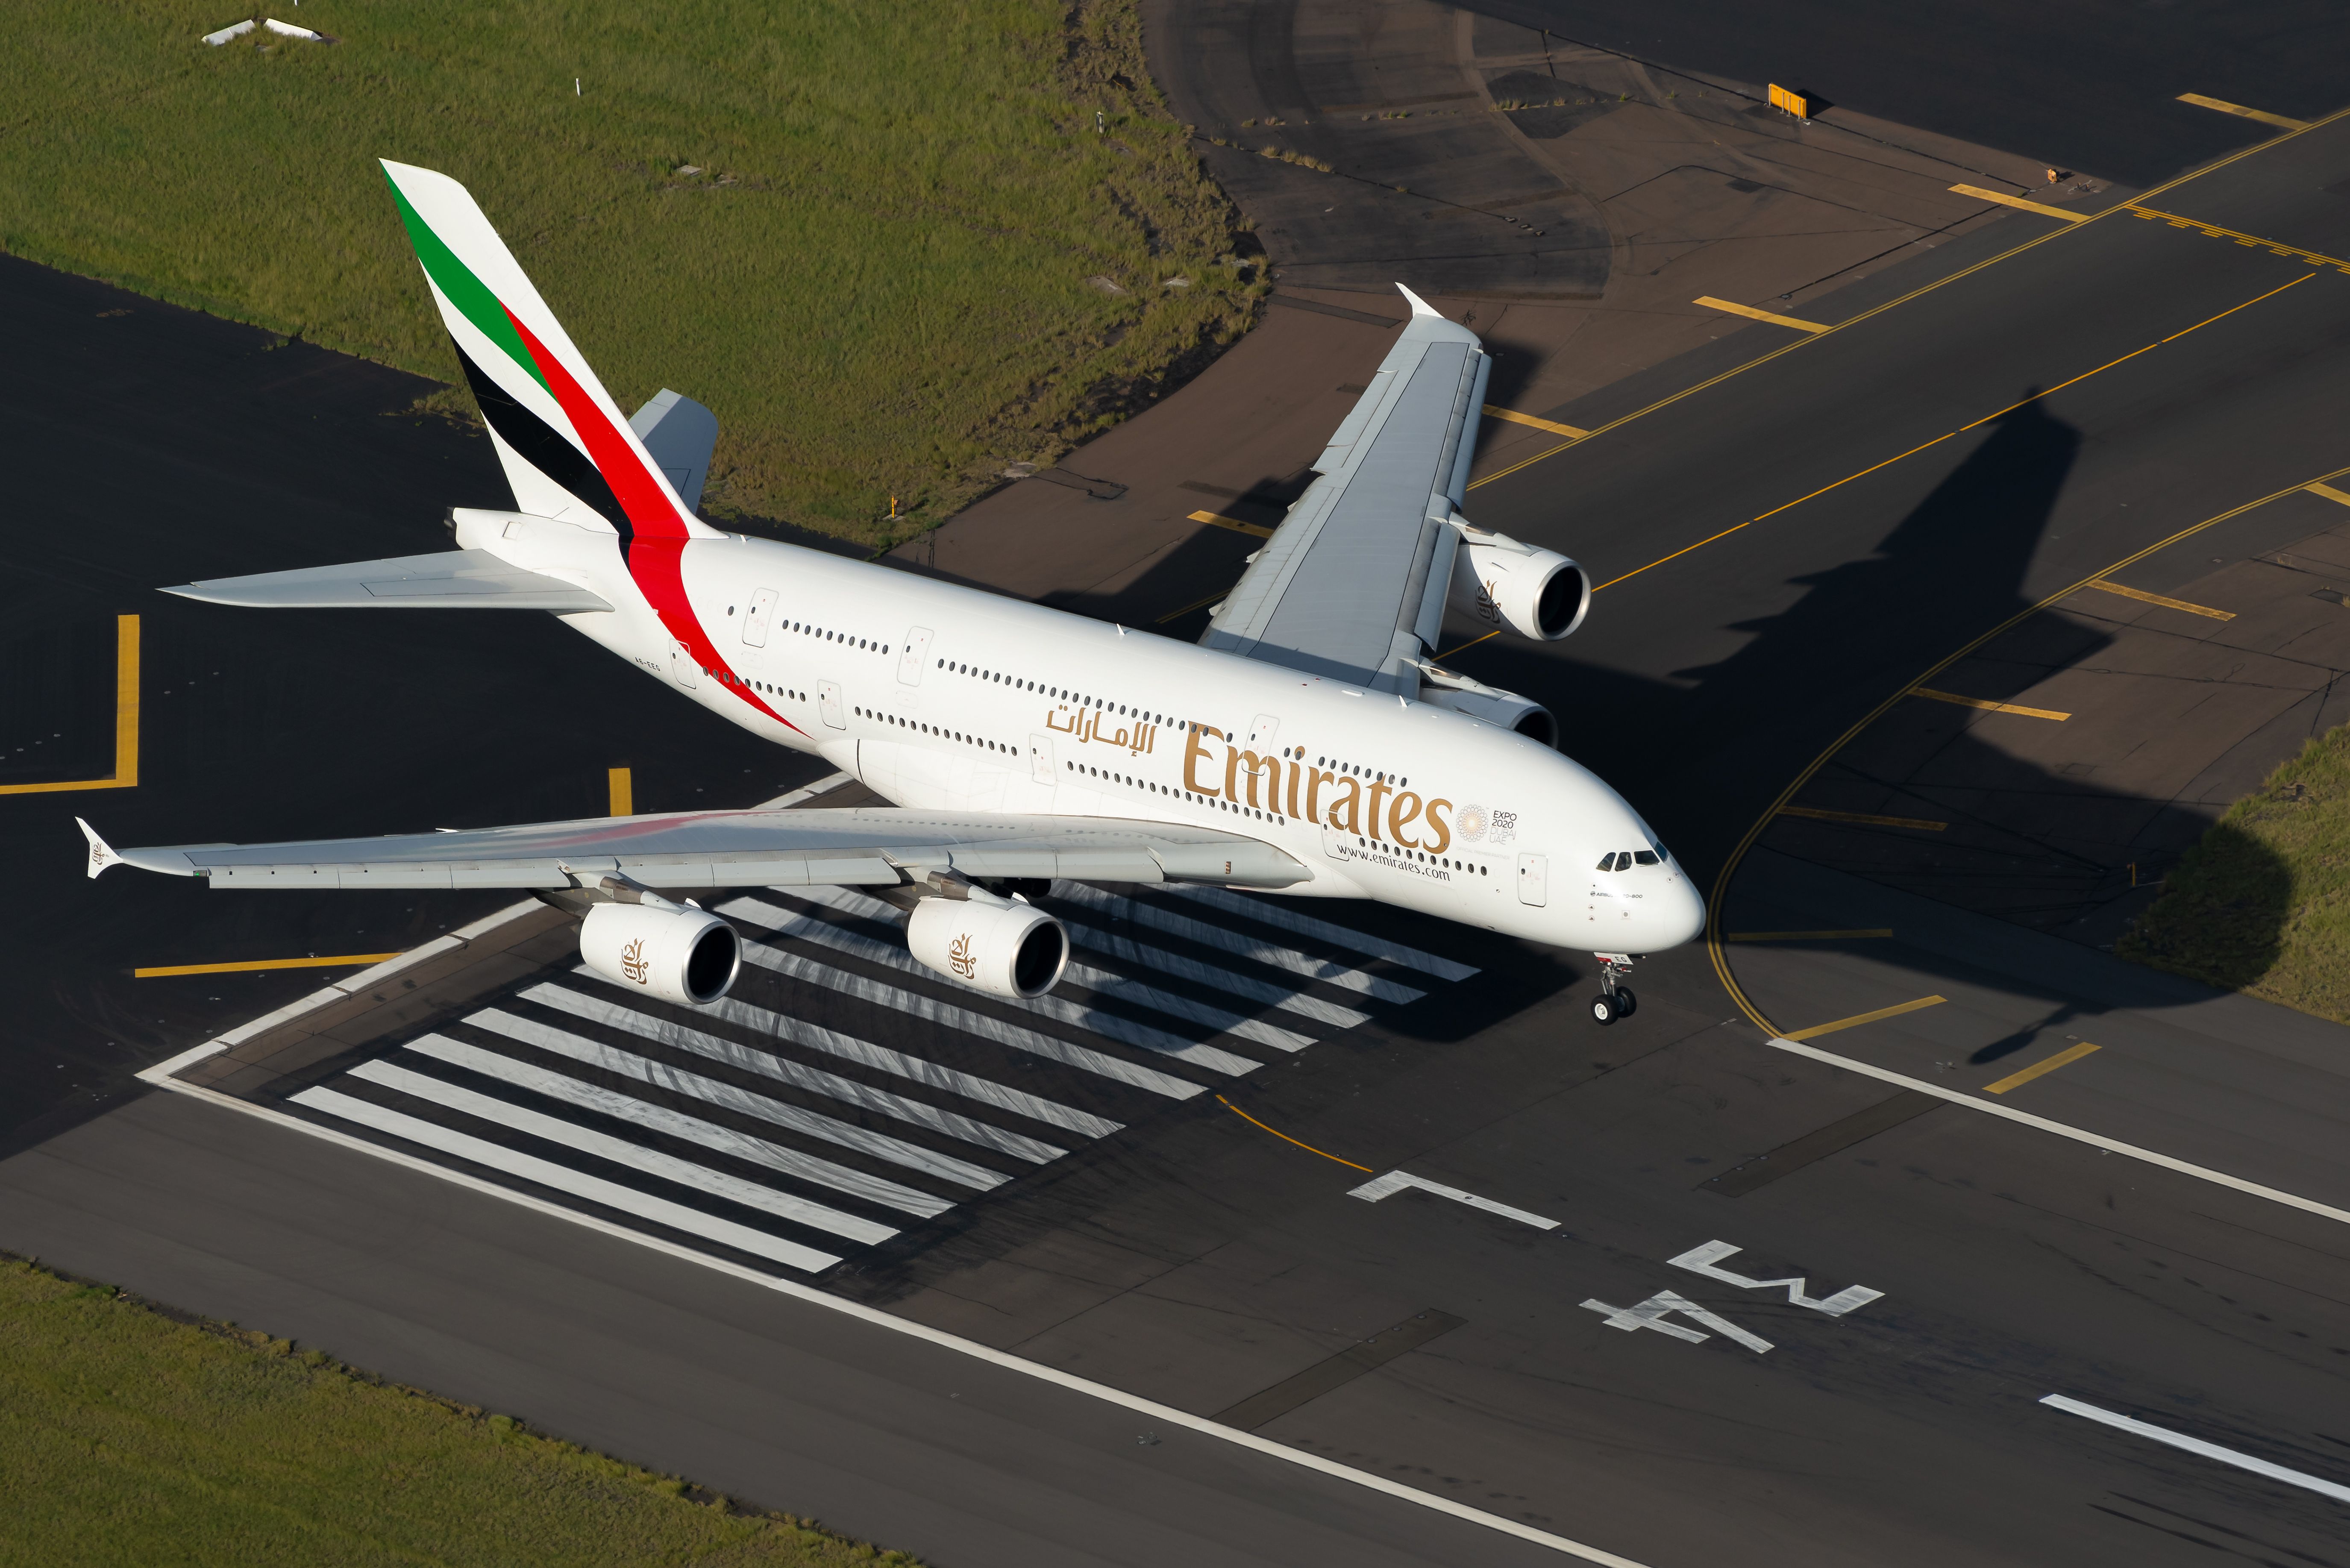 Emirates Airbus A380 landing at Sydney Airport SYD